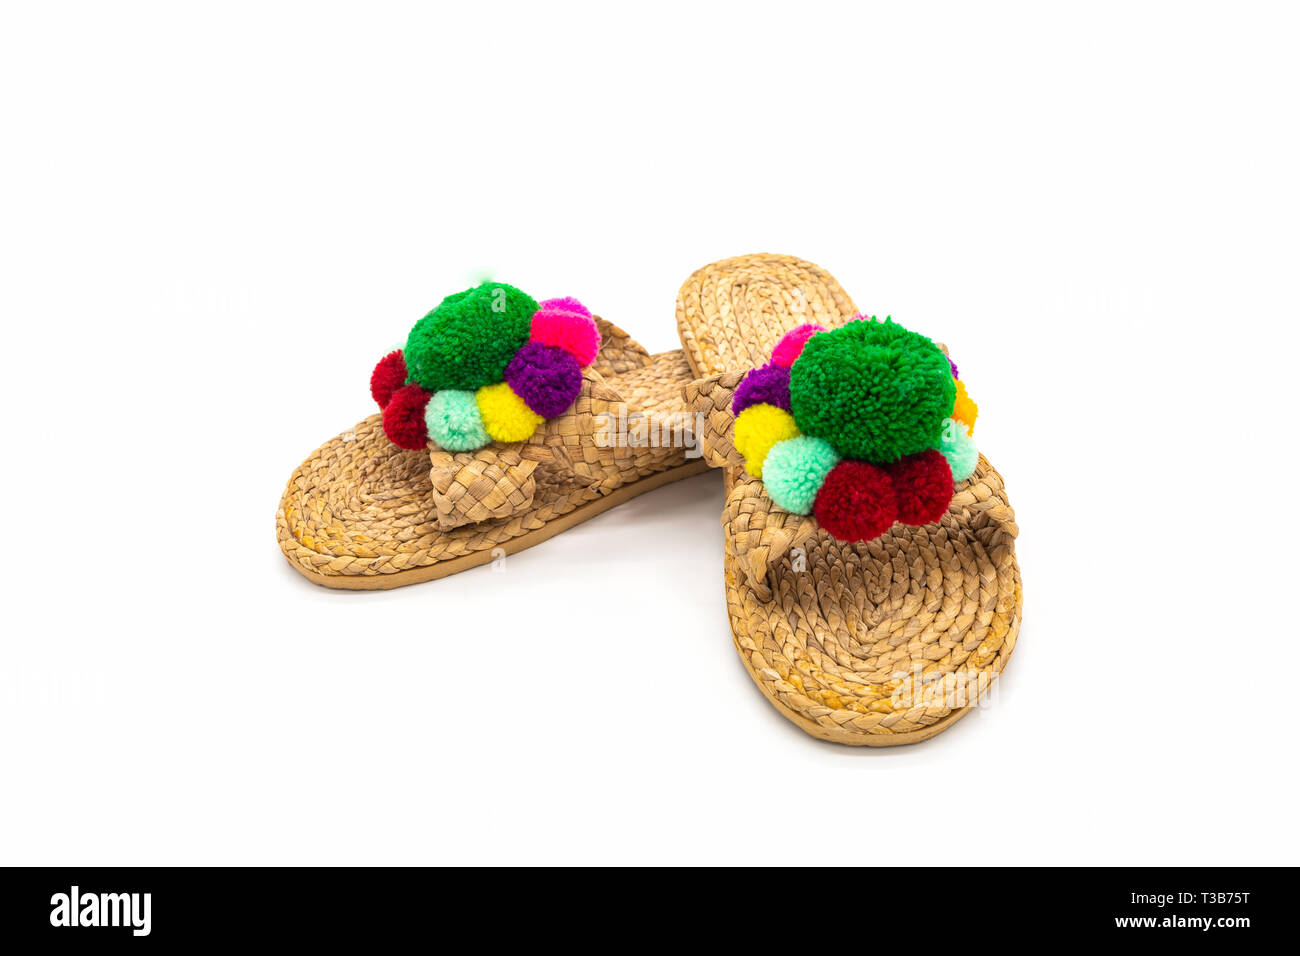 Sandals shoes handicraft made by water hyacinth on white background. Flip flops handmade. Stock Photo